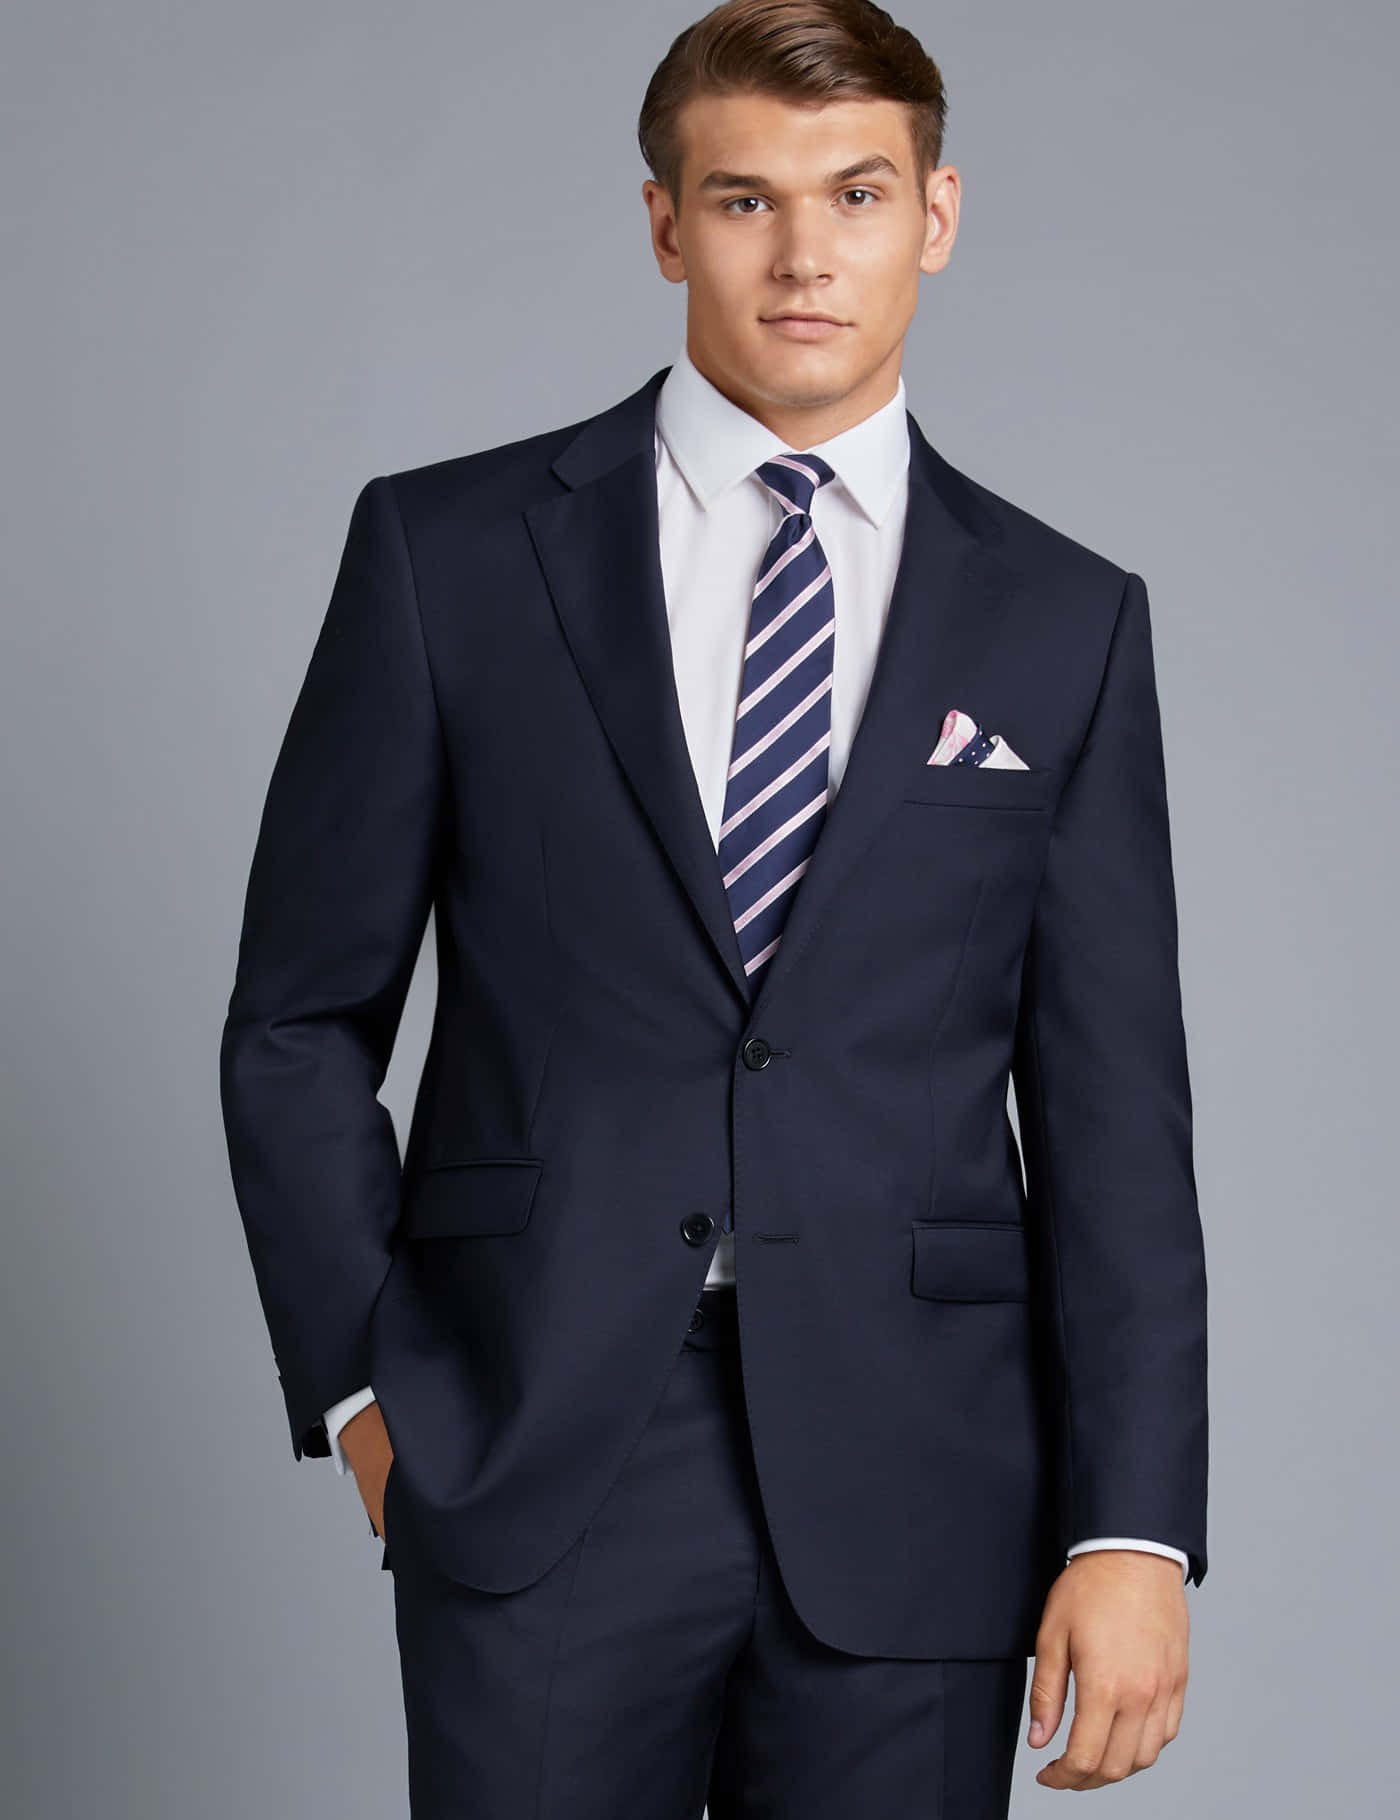 "Modern and Elegant Business Suit for the Confident Man"